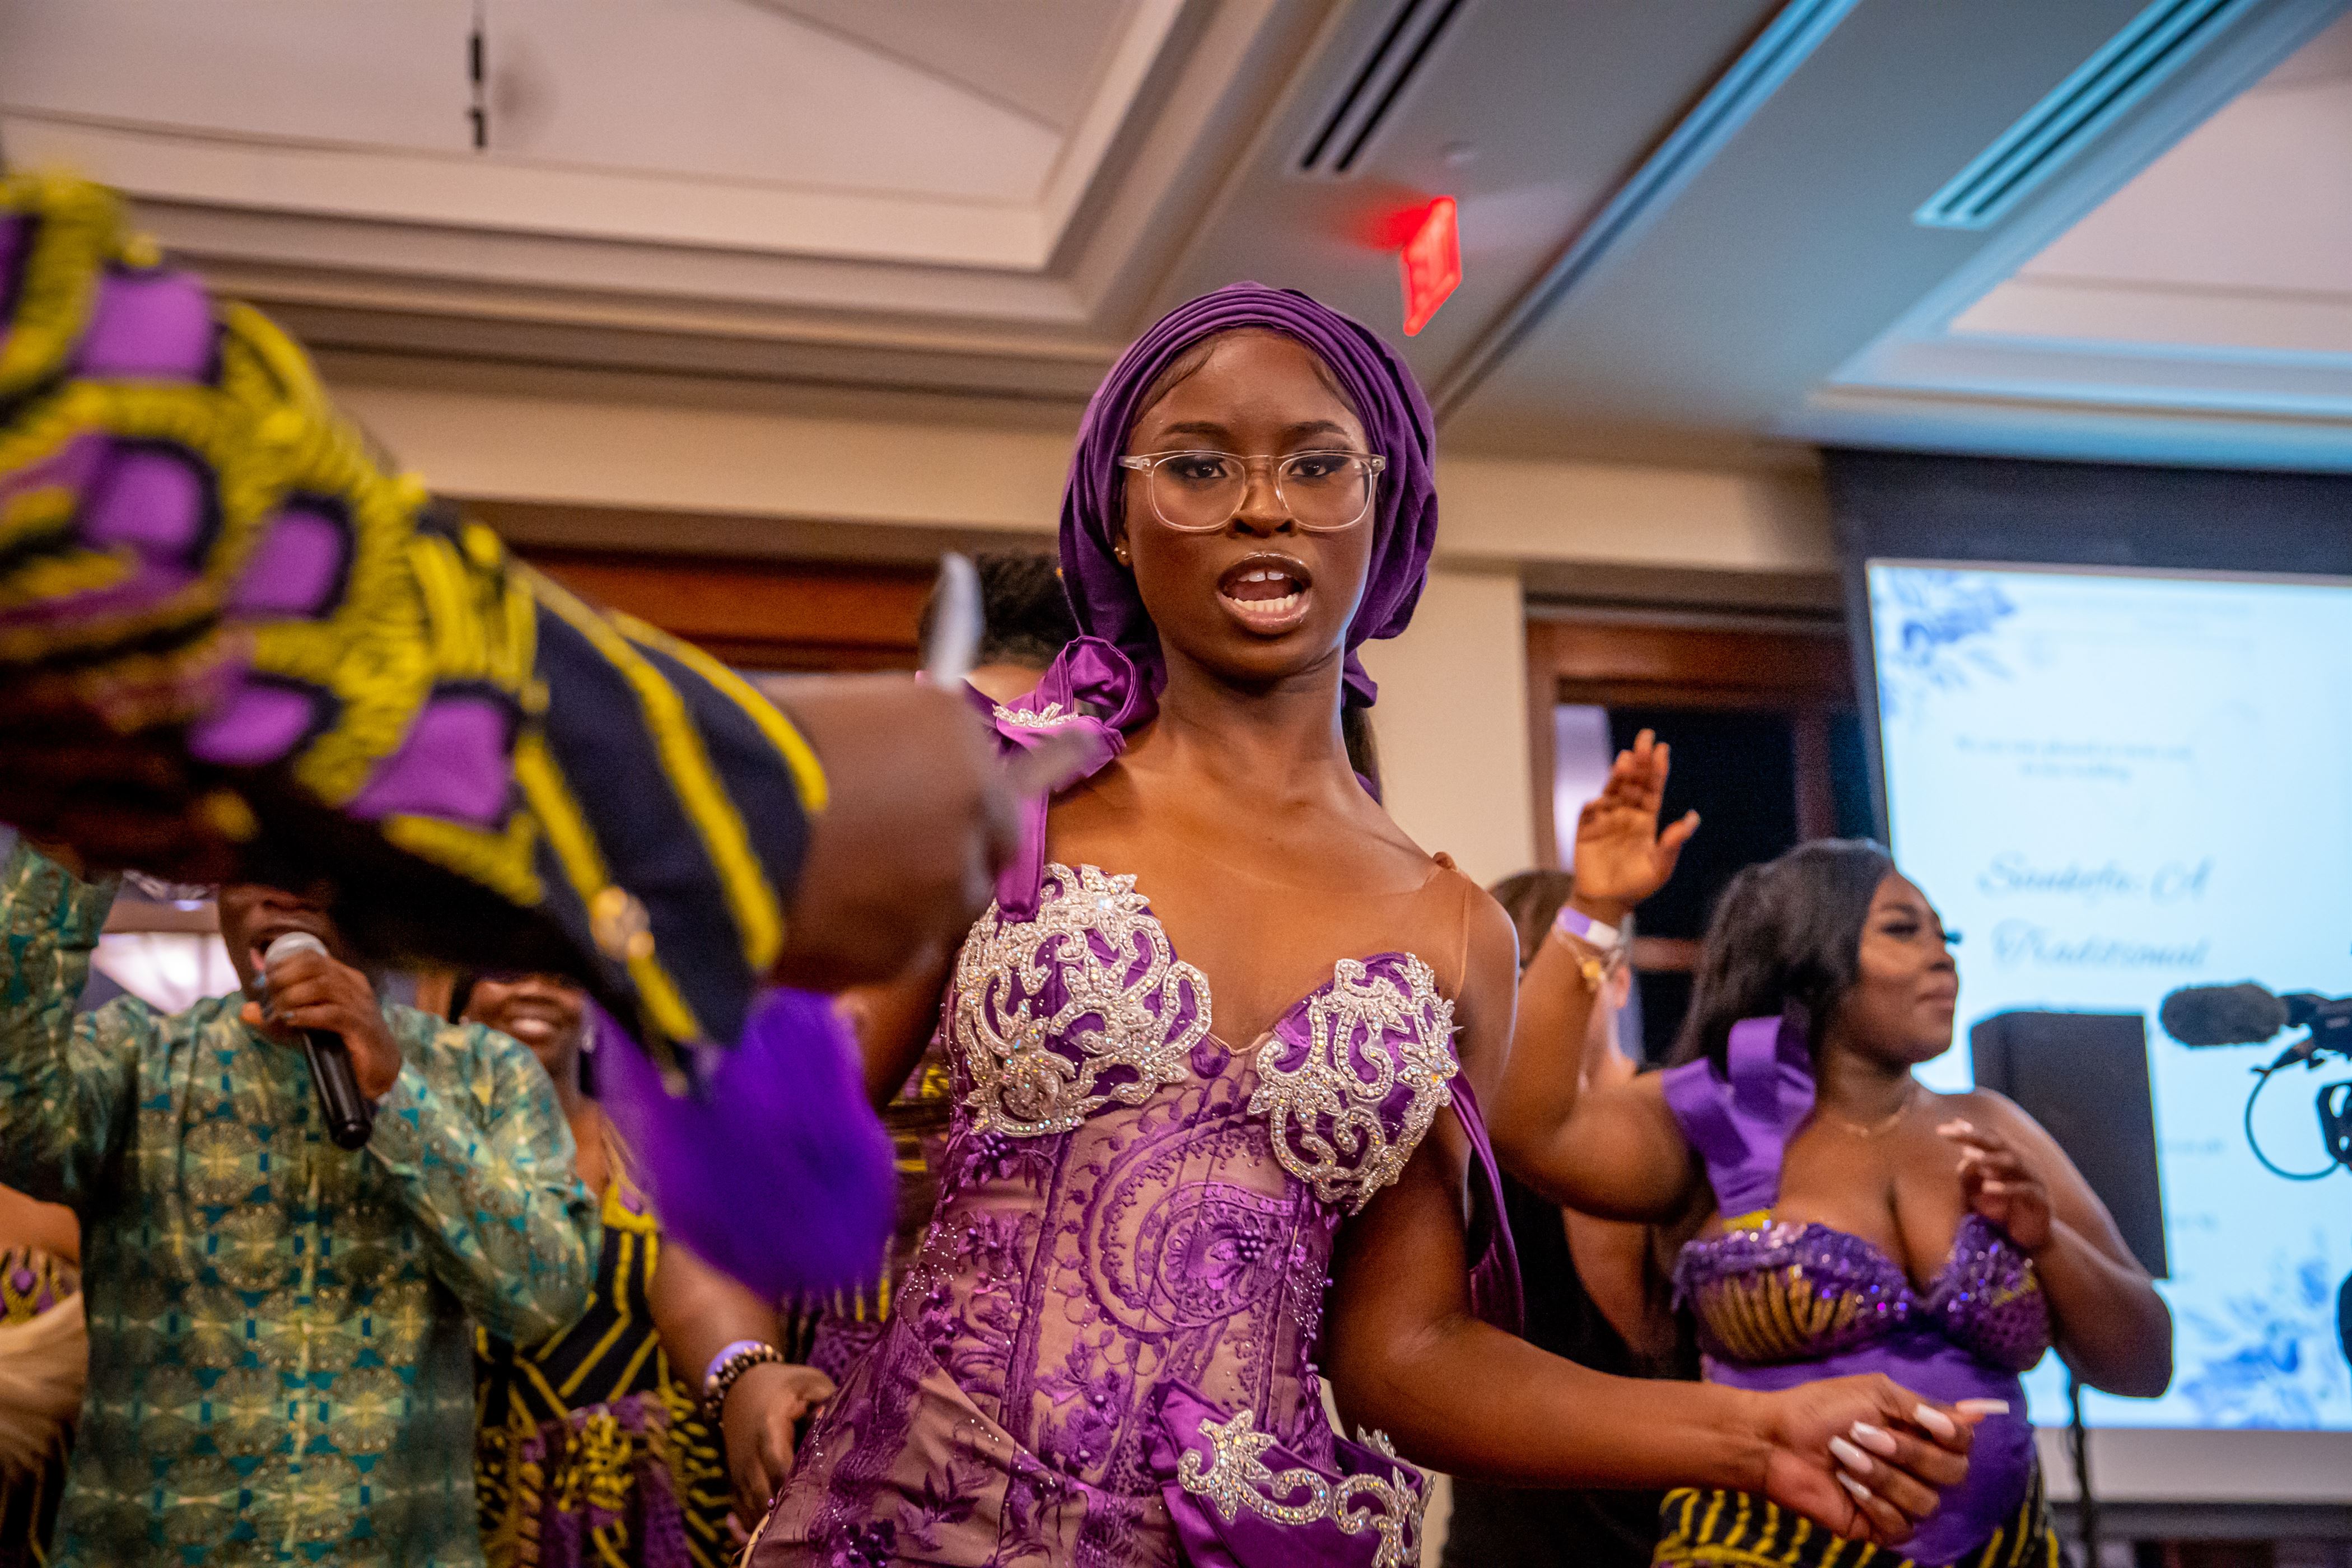 Mary Olatunji dances on stage as she is revealed as the bride. 
Lynise Olivacce | The Montclarion